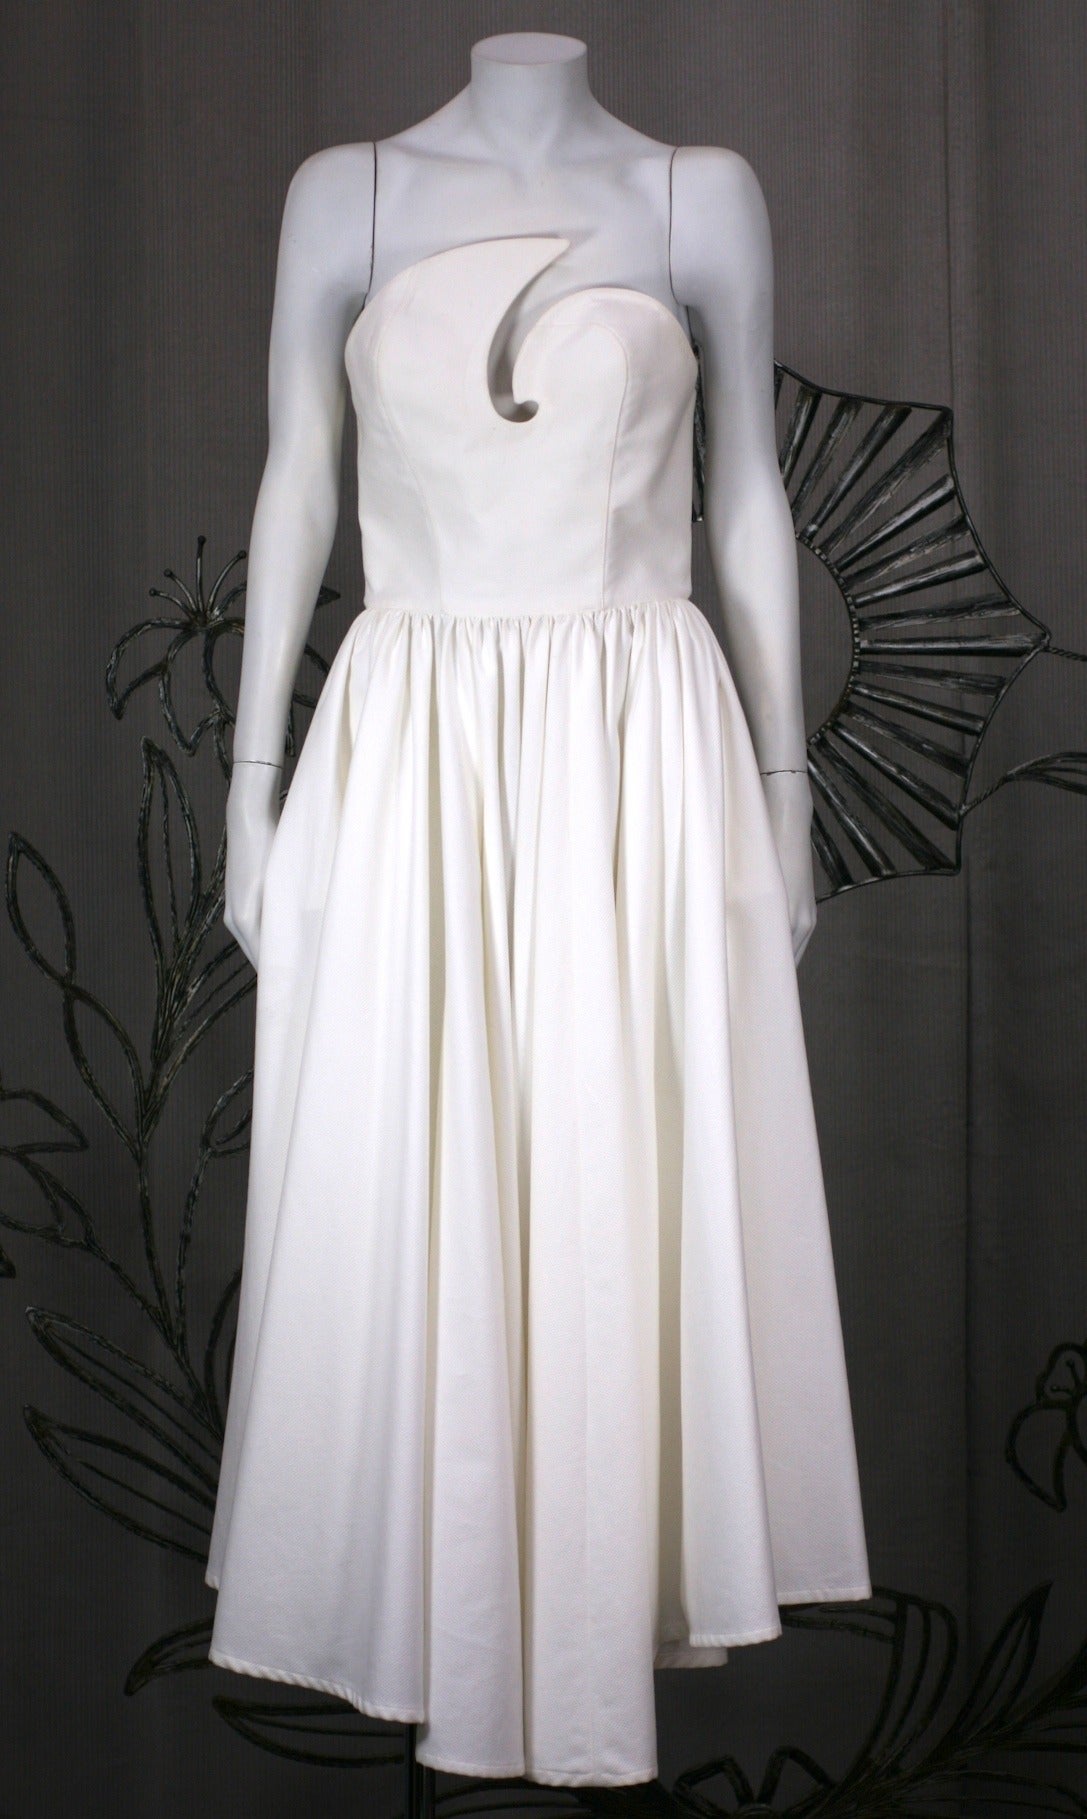 Thierry Mugler's dramatic white cotton pique sun dress with assymetrical swirl cut outs on strapless bodice with full dipping hem circle skirt. Bodice is boned for support and snaps up the back. Hem dips in front and has self belt with antique